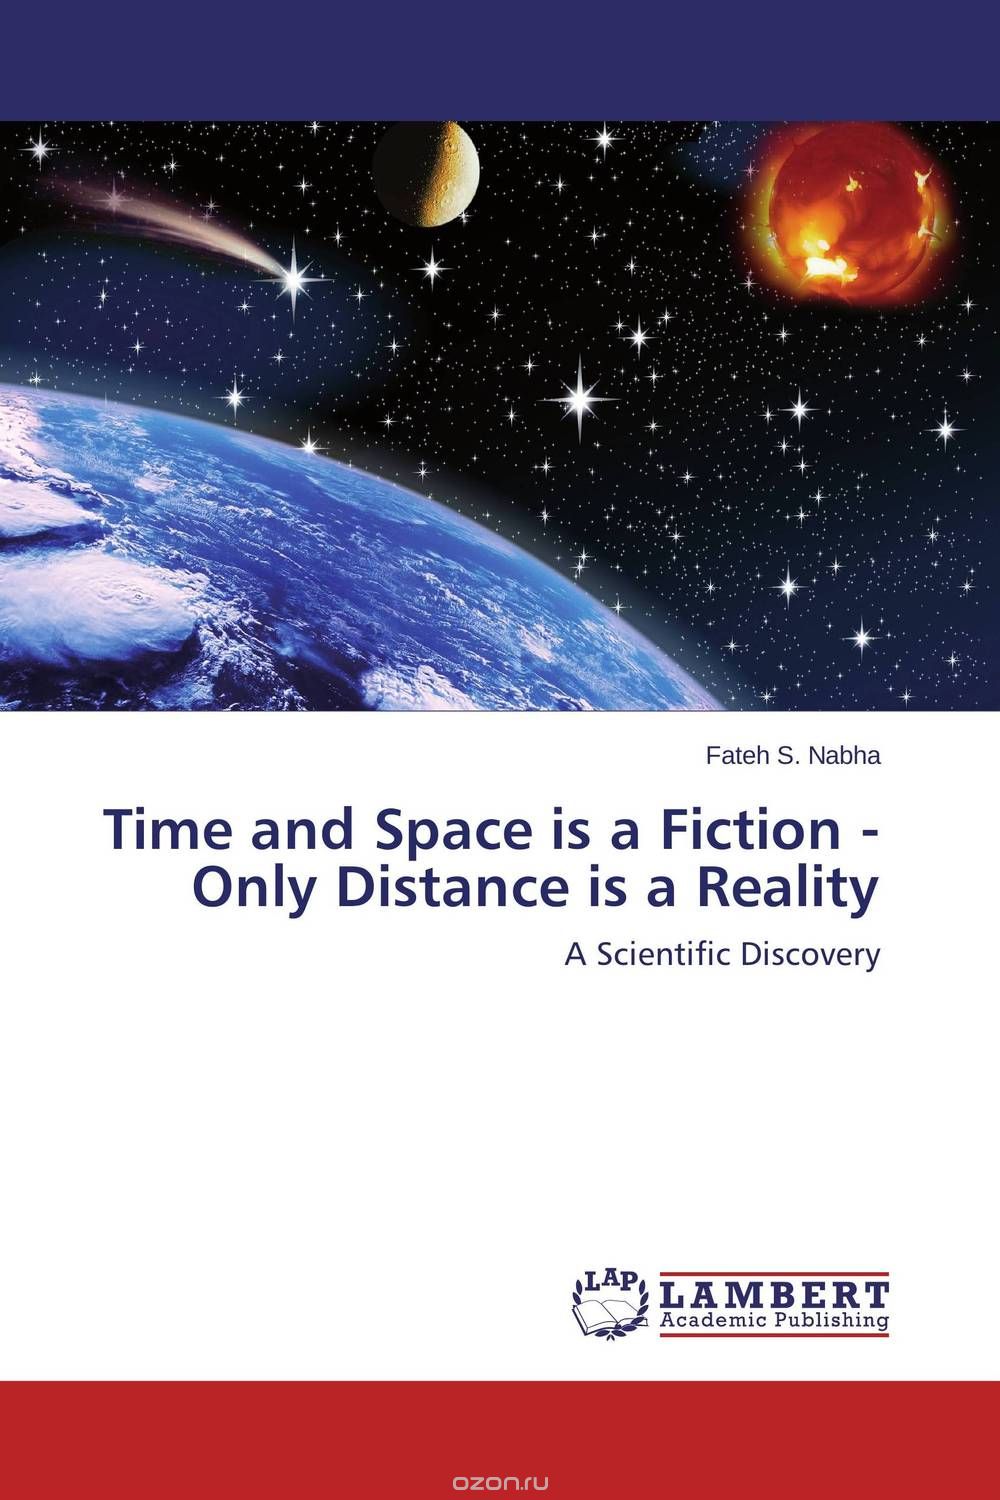 Скачать книгу "Time and Space is a Fiction - Only Distance is a Reality"